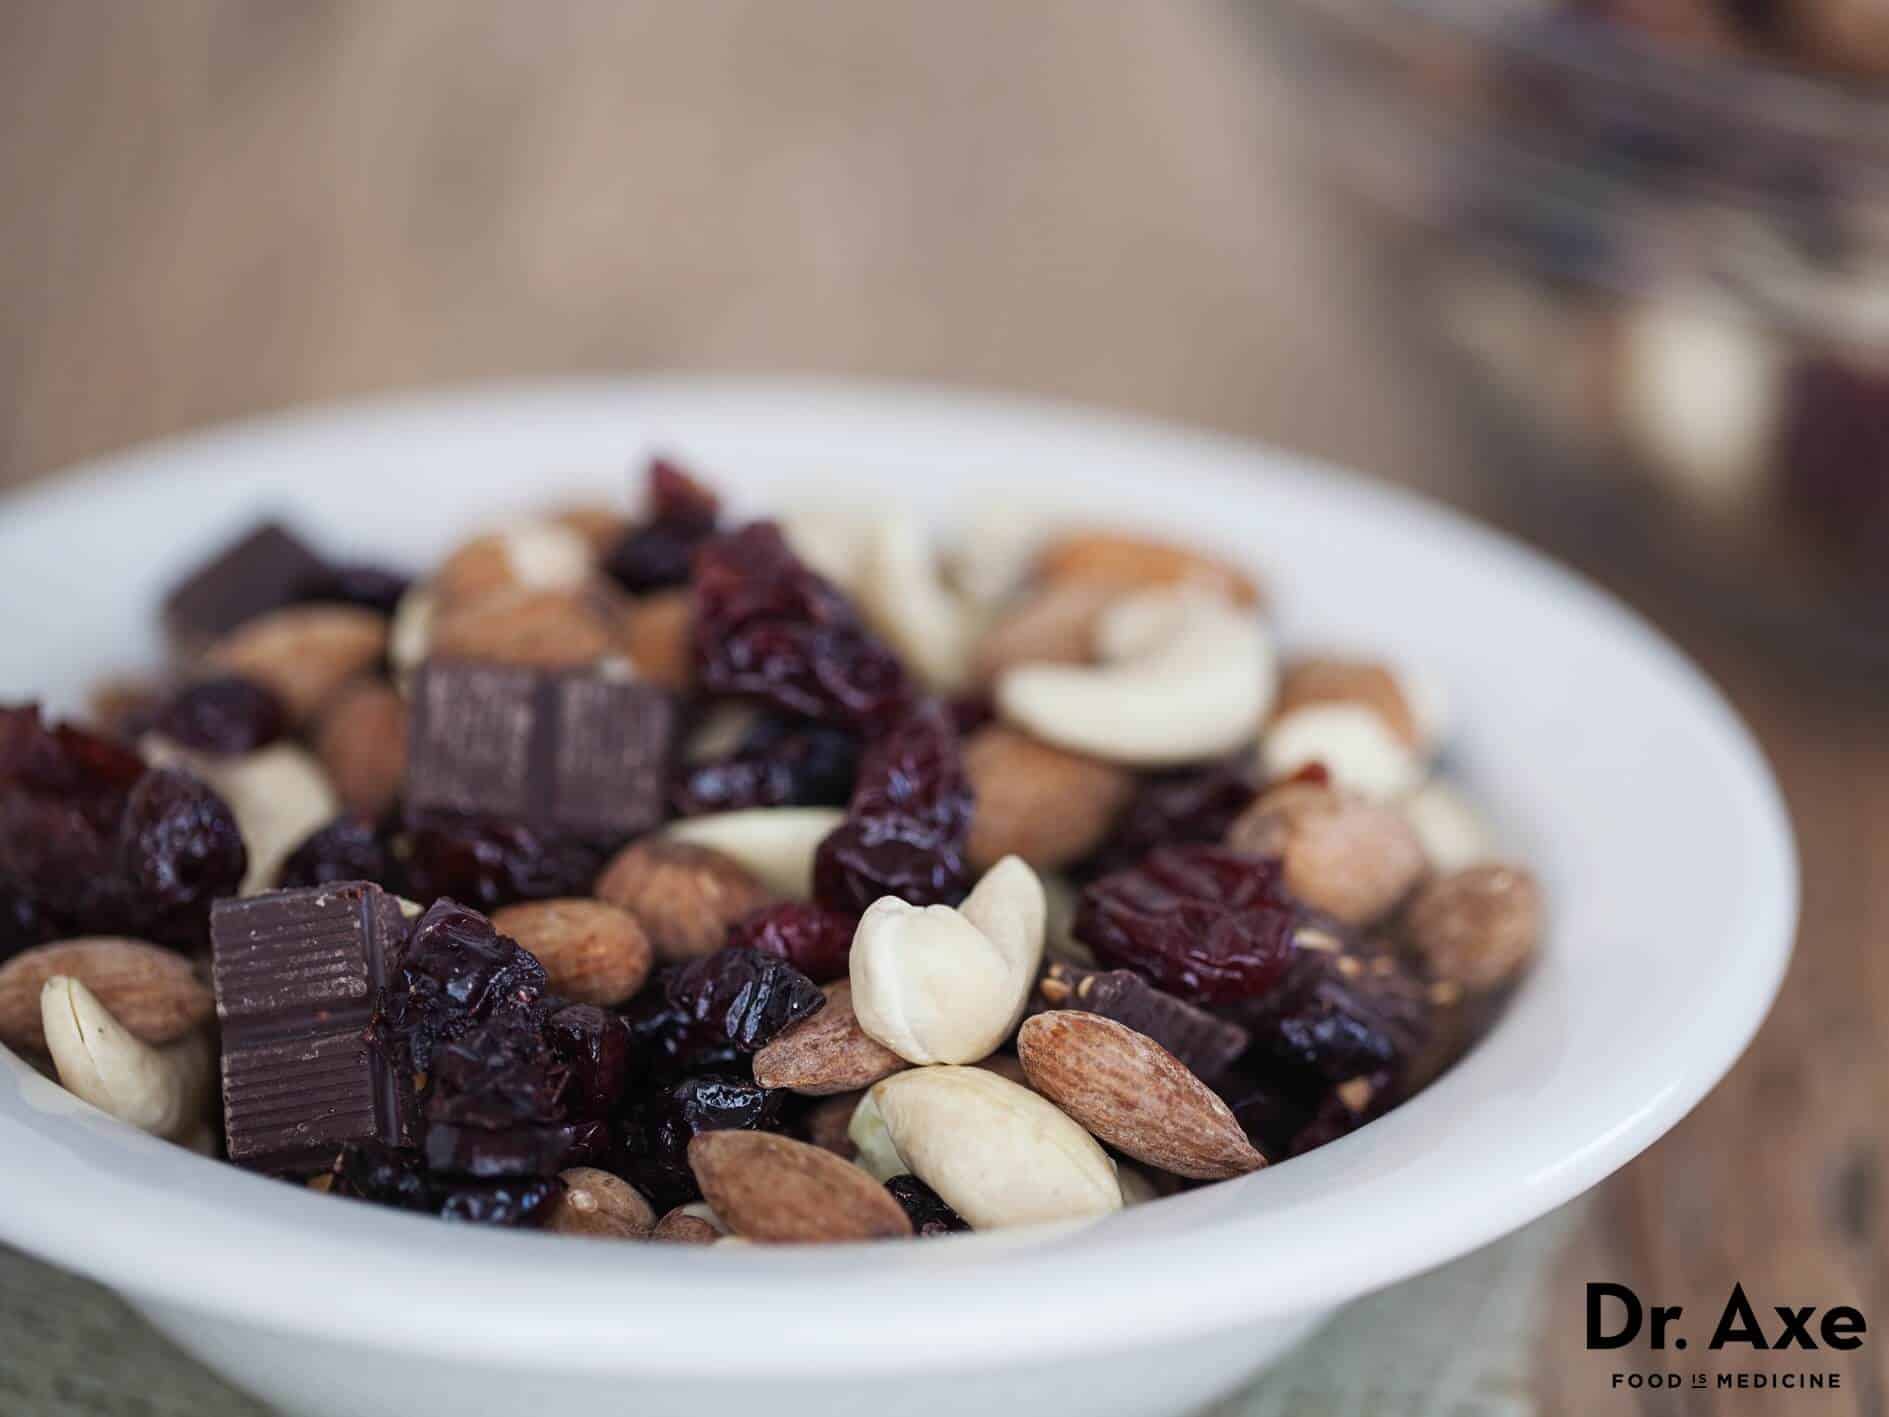 Trail mix recipe - Dr. Axe